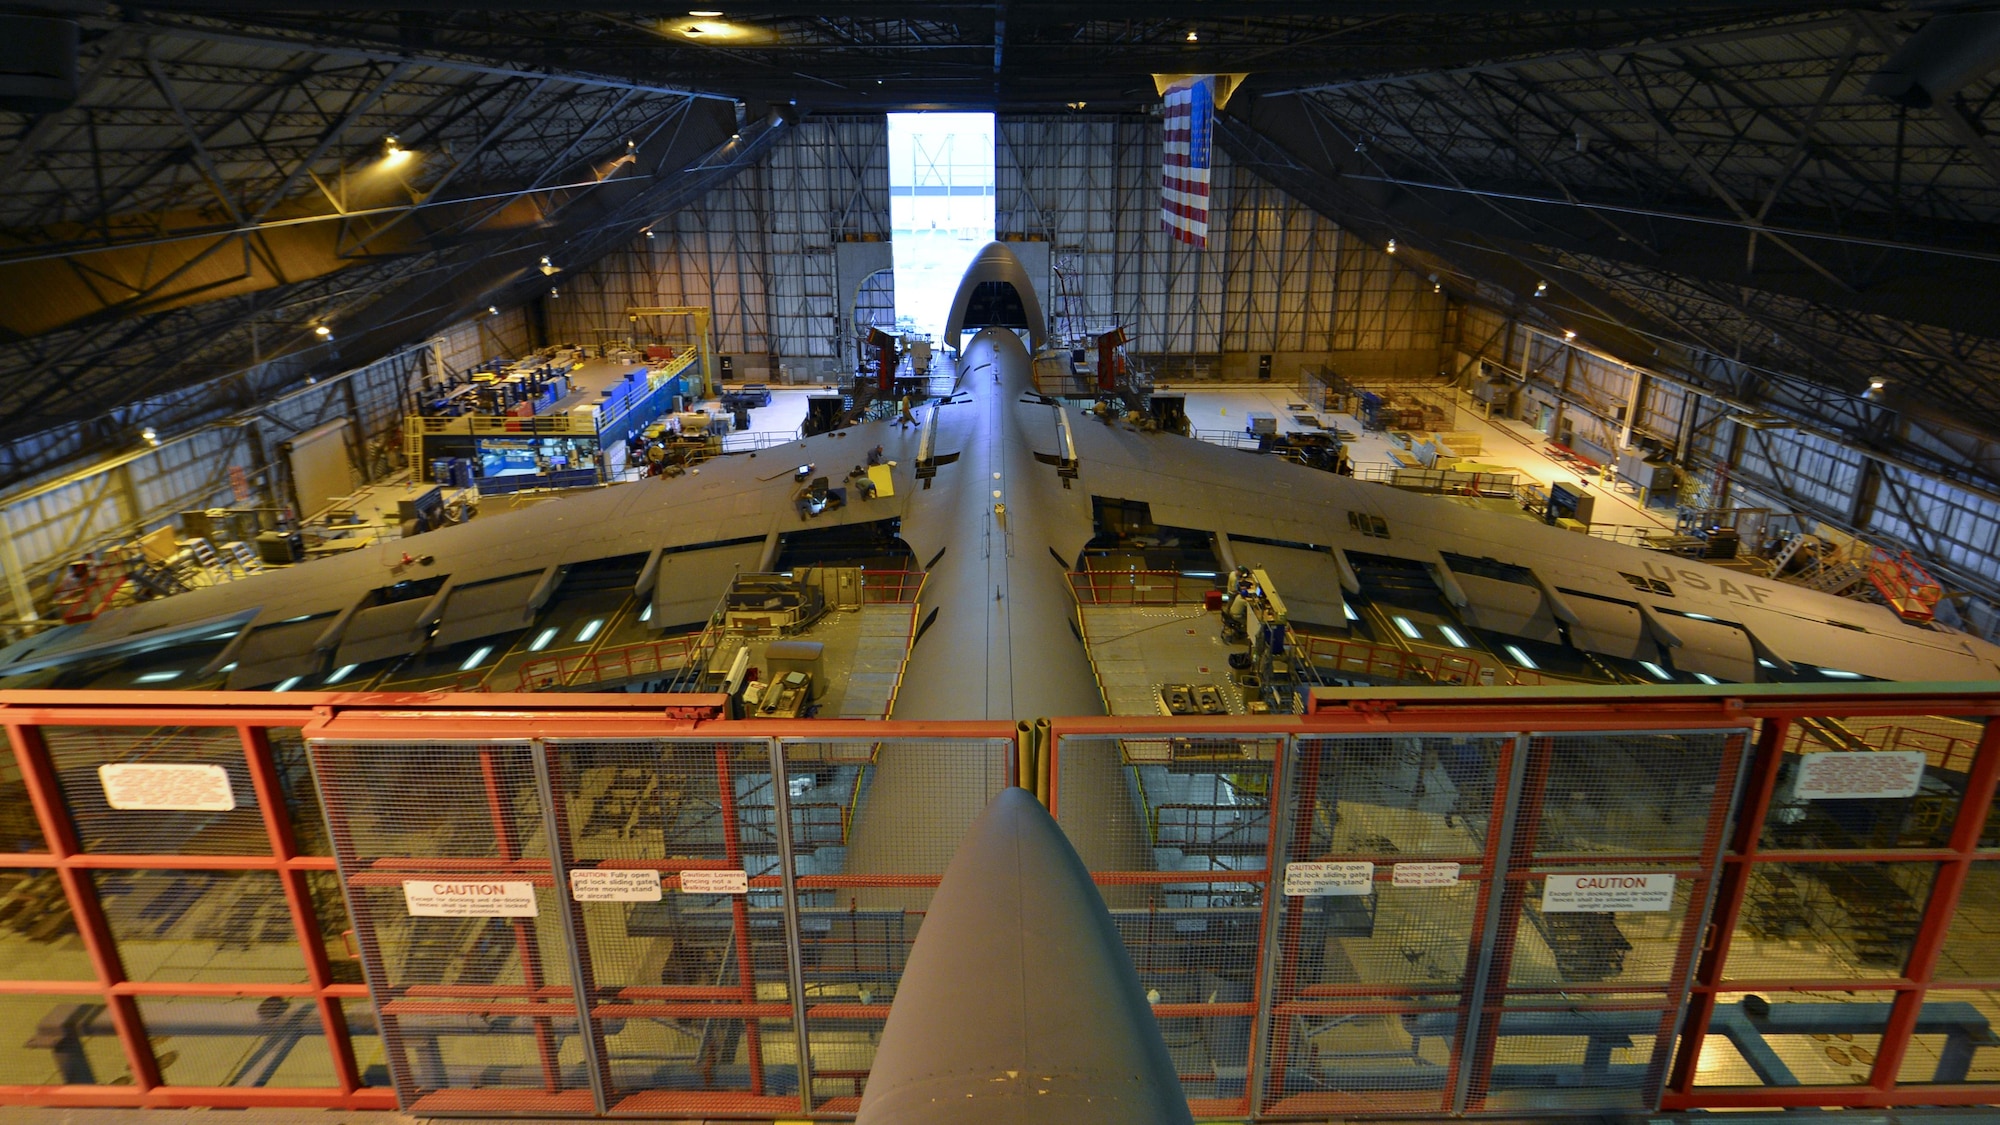 A C-5M Super Galaxy undergoes a Maintenance Steering Group-3 Major inspection Dec. 2, 2015, in the isochronal dock of the 436th Maintenance Squadron at Dover Air Force Base, Del. A Major ISO inspection takes approximately 55 days and more than 100 maintainers can be working on the aircraft at any given time. (U.S. Air Force photo/Senior Airman William Johnson)